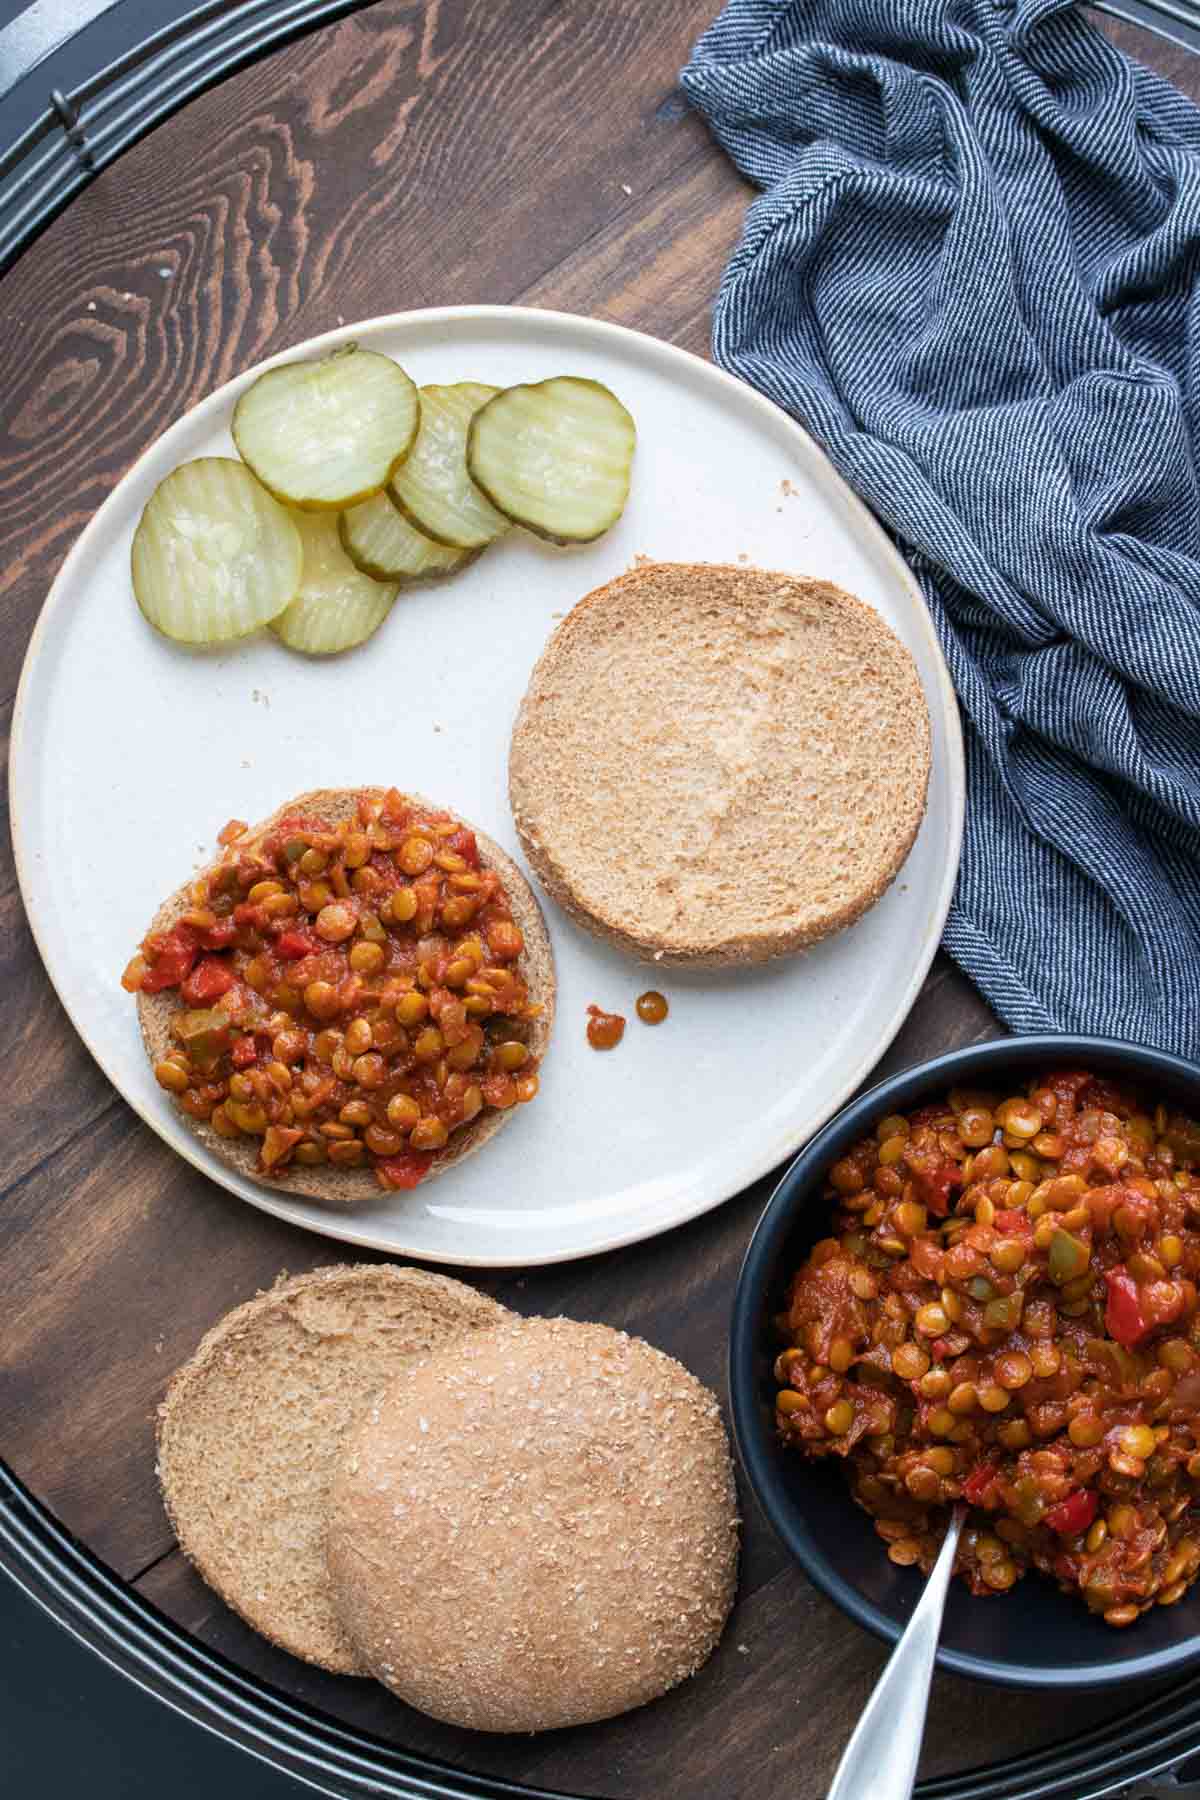 Open faced lentil based sloppy joe on a white plate with pickles on the side